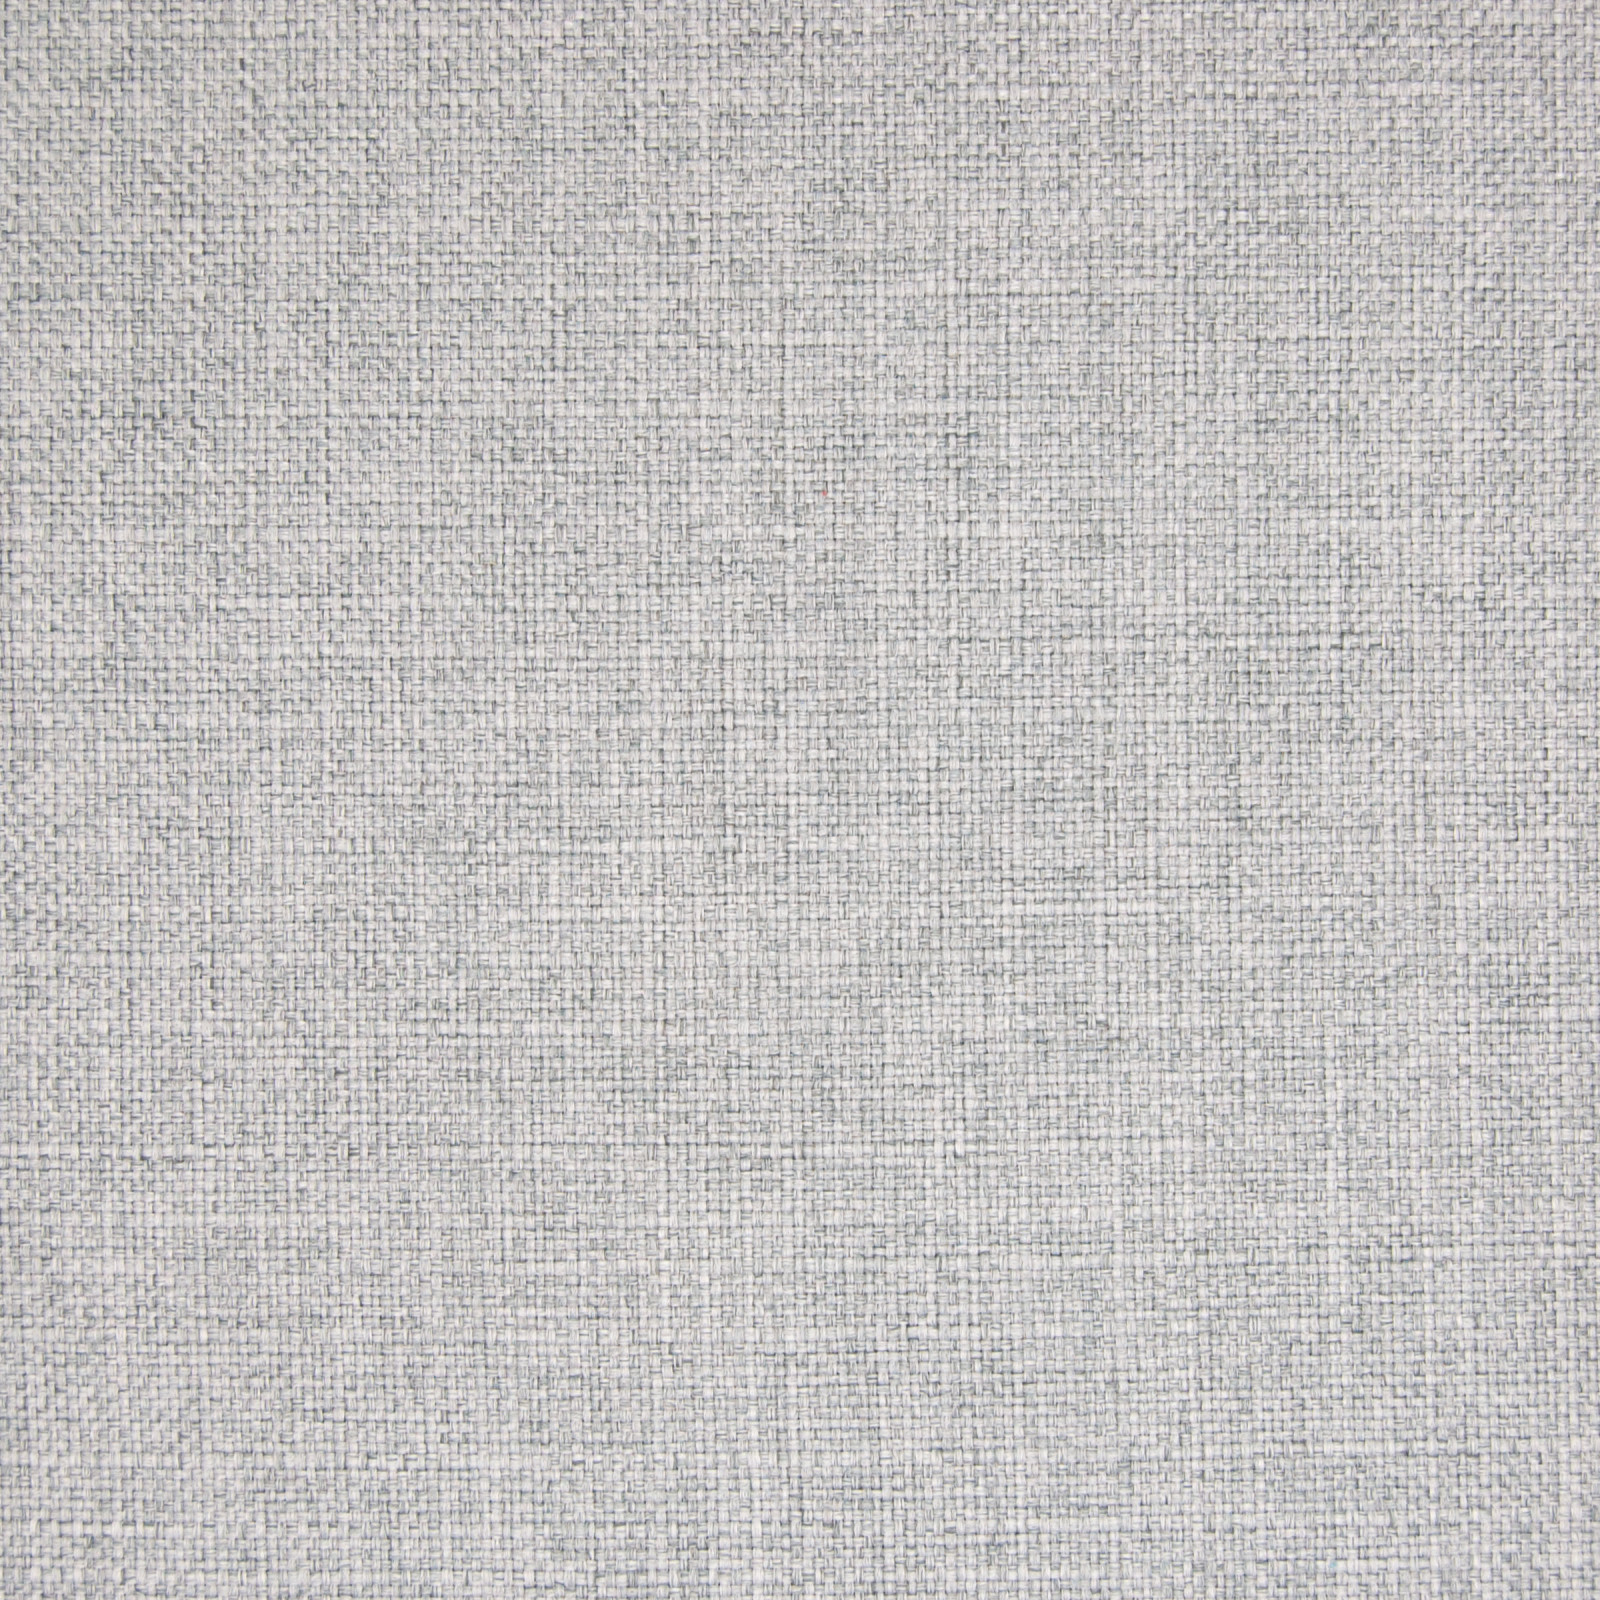 Grey Woven Fabric | vlr.eng.br